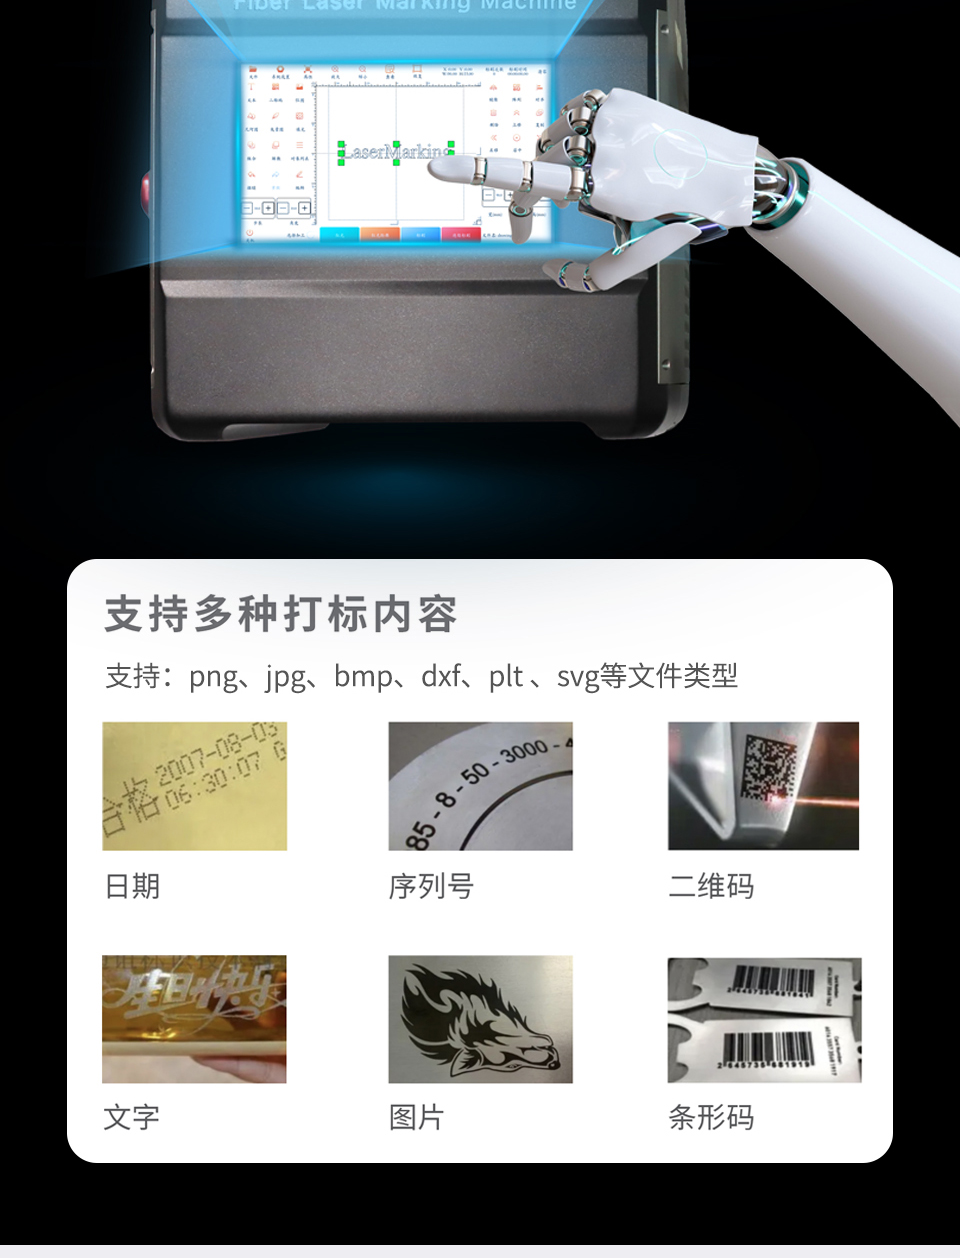 Small portable laser marking machine, laser etching machine manufacturer, portable laser engraving and lettering machine